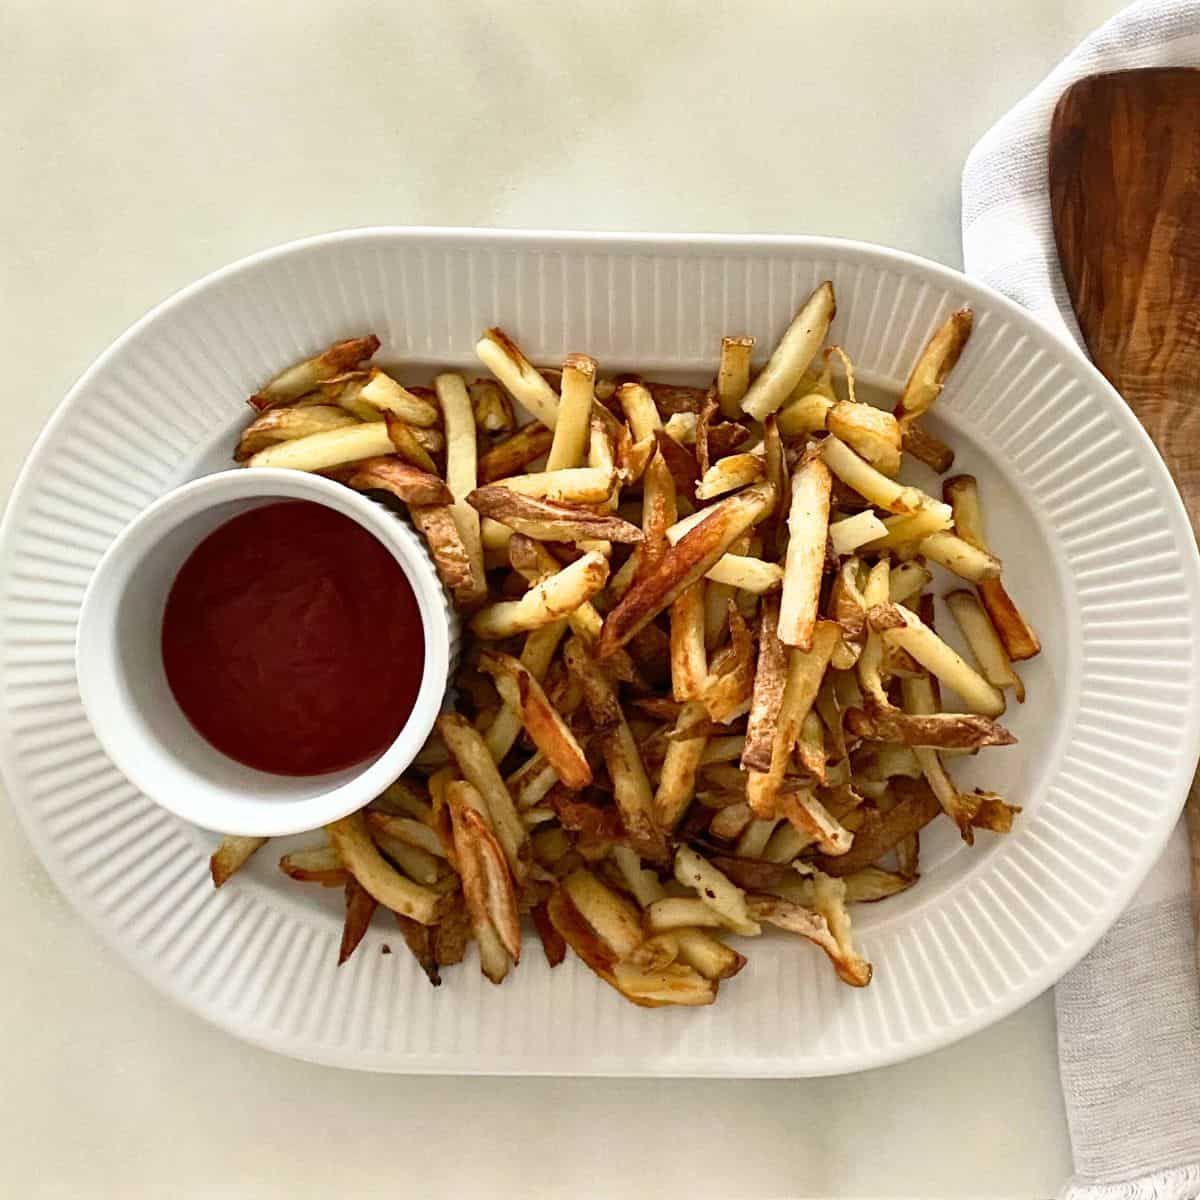 Homemade French fries on a platter with ketchup